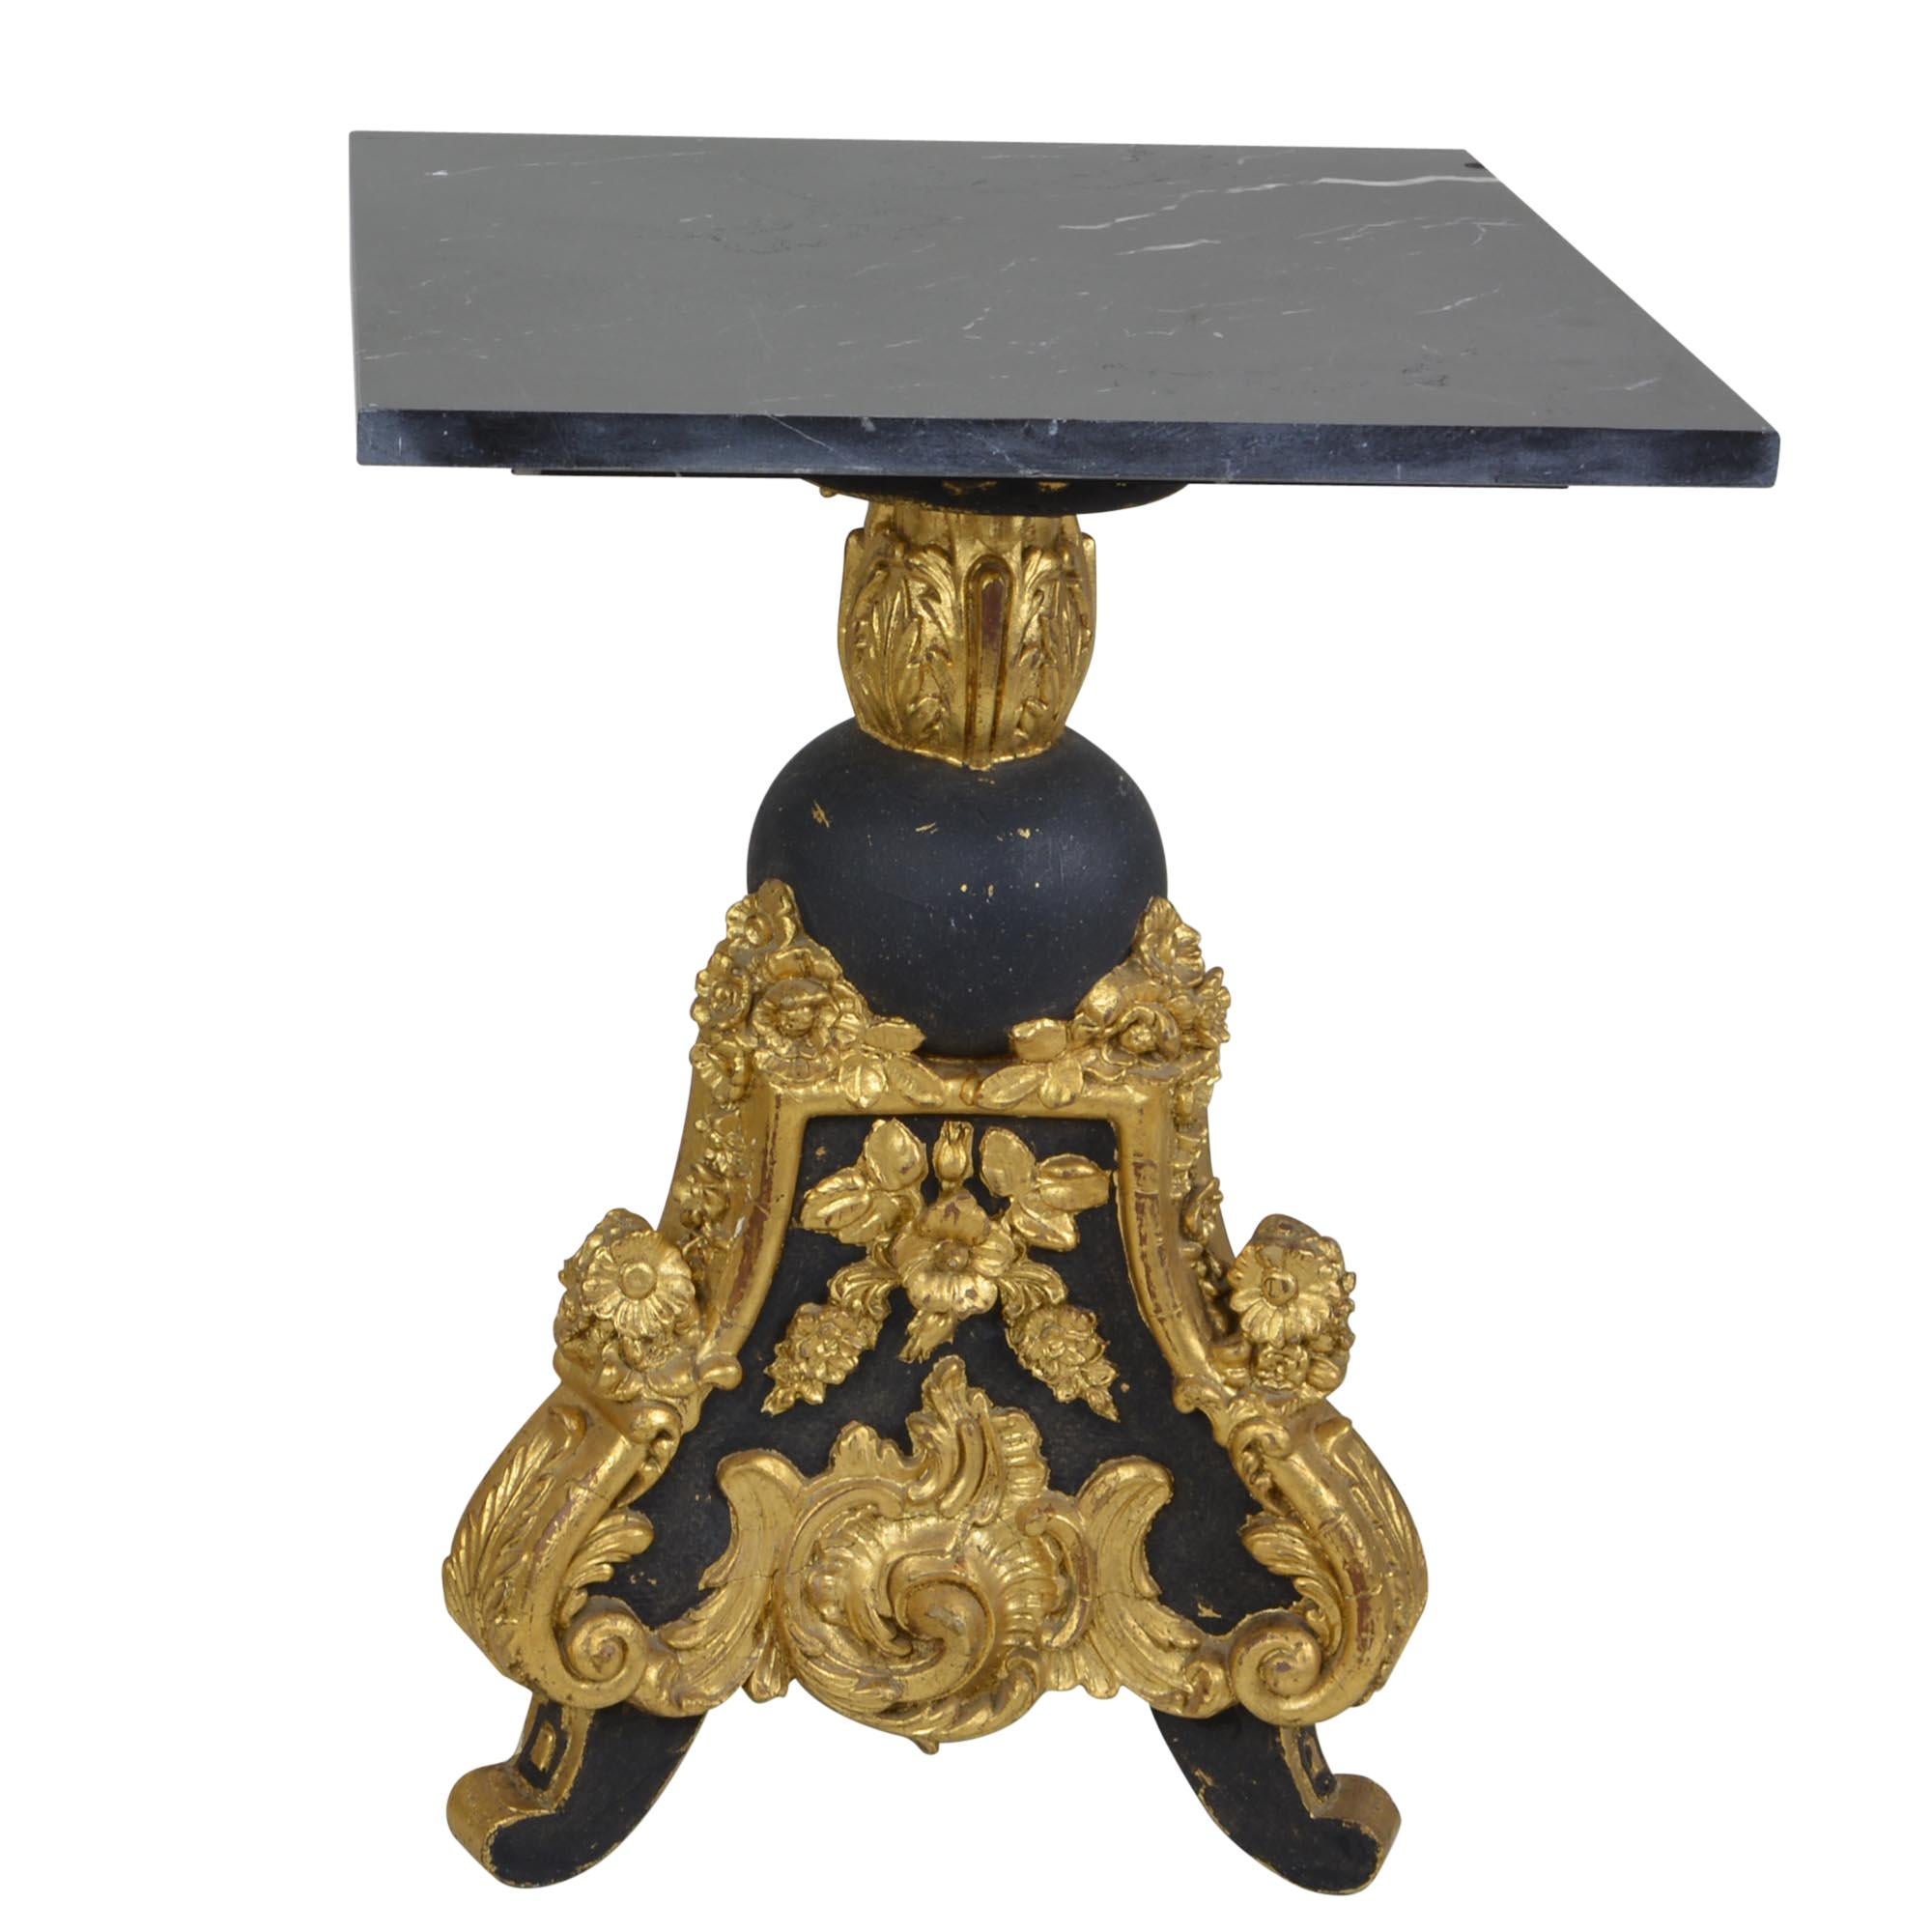 This pair of side tables is sure to add a sense of flair to any room. The square marble tops sit atop the triangular black and gold painted bases. The are small enough to work either as side tables or end tables.